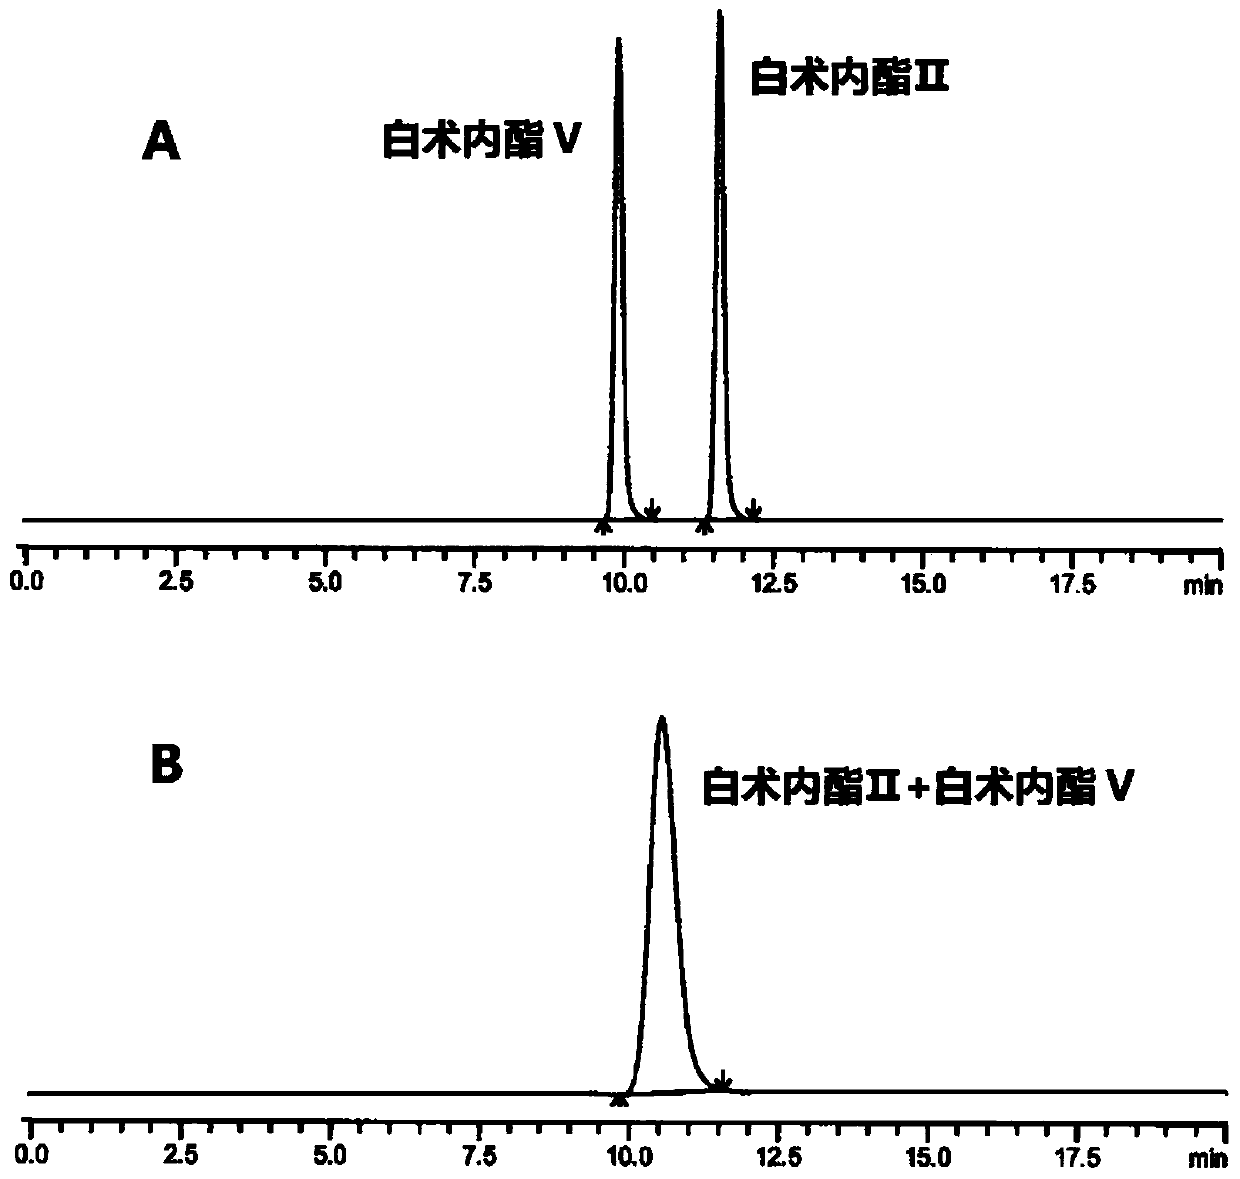 A hplc method for separating and detecting atractyloid ii and atractyloid v